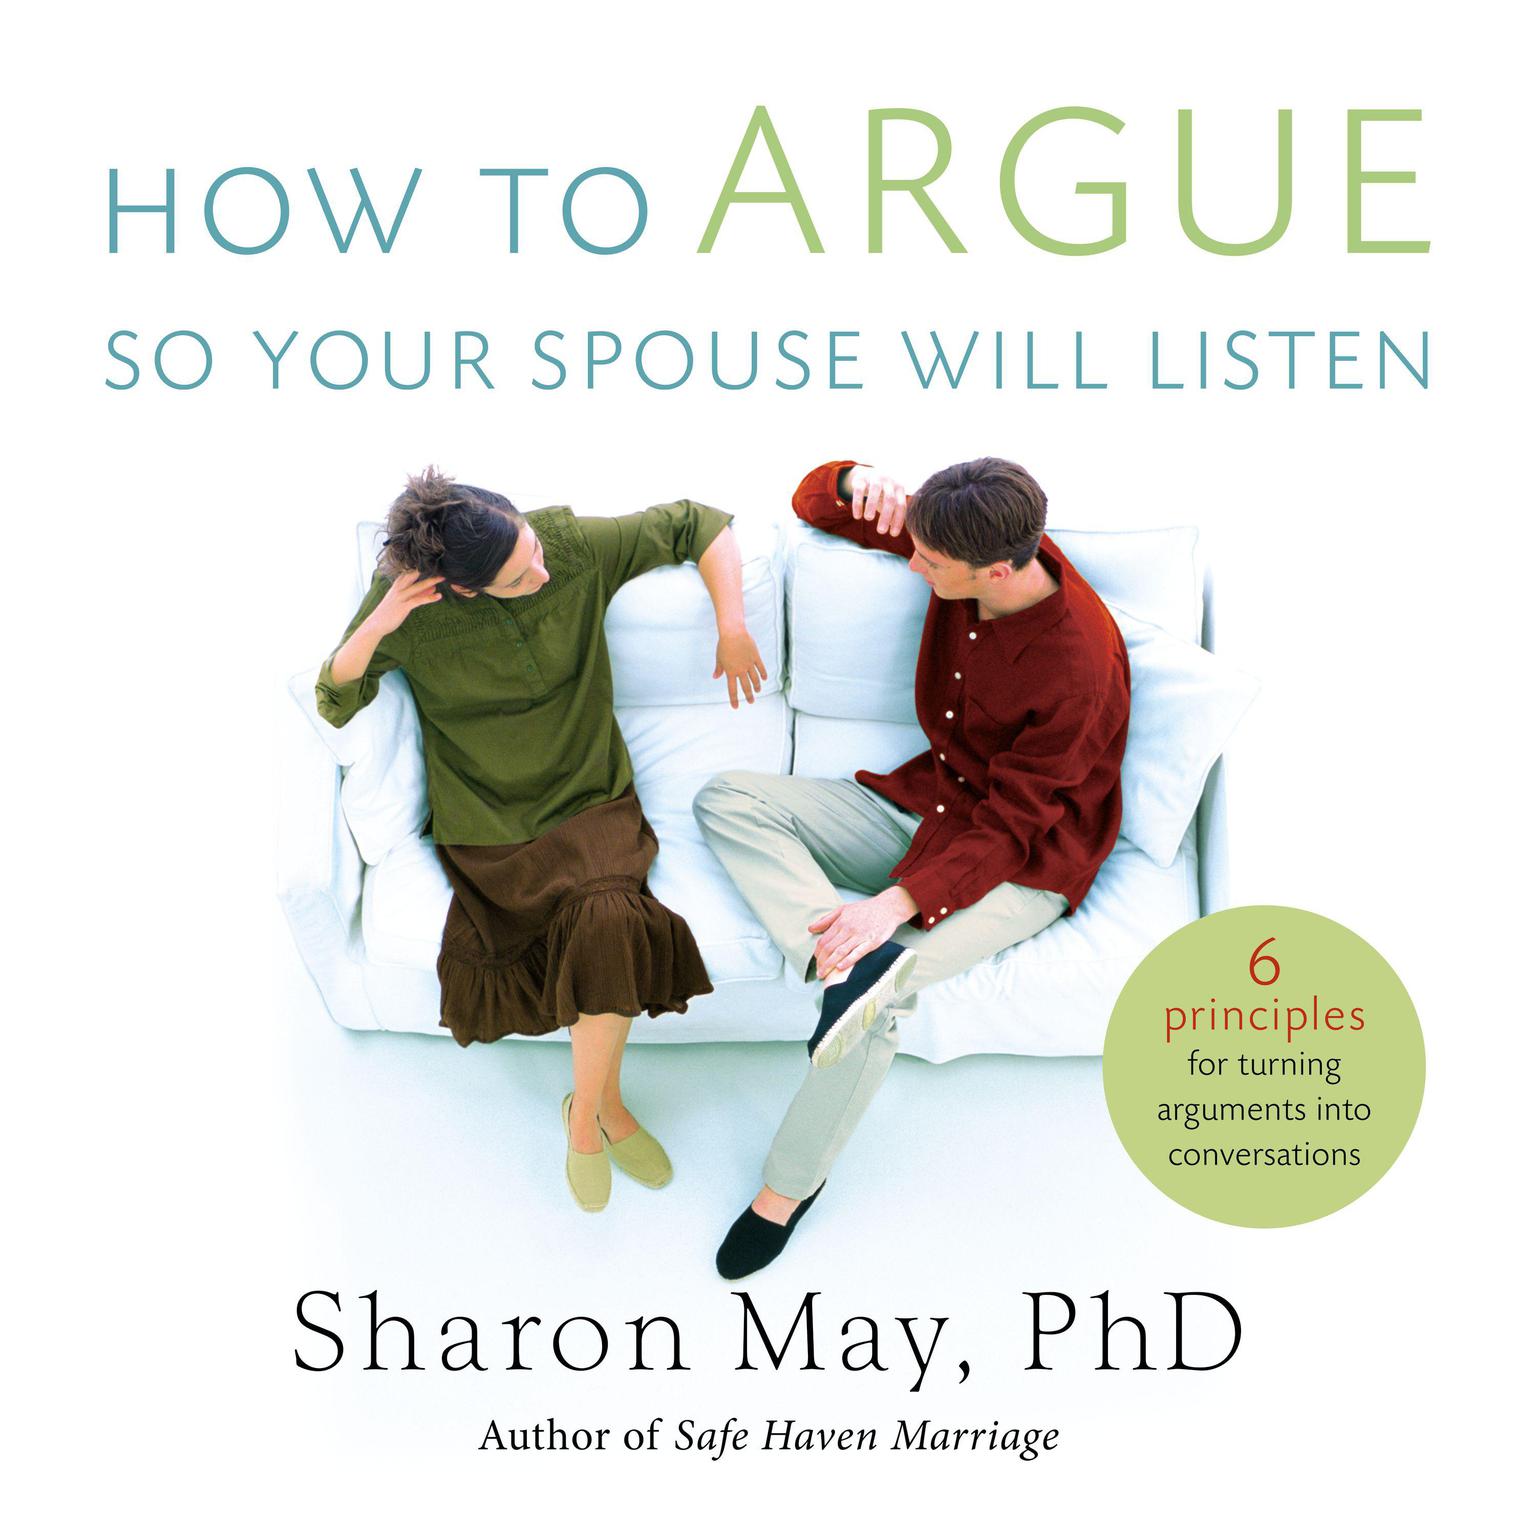 How To Argue So Your Spouse Will Listen: 6 Principles for Turning Arguments into Conversations Audiobook, by Sharon May